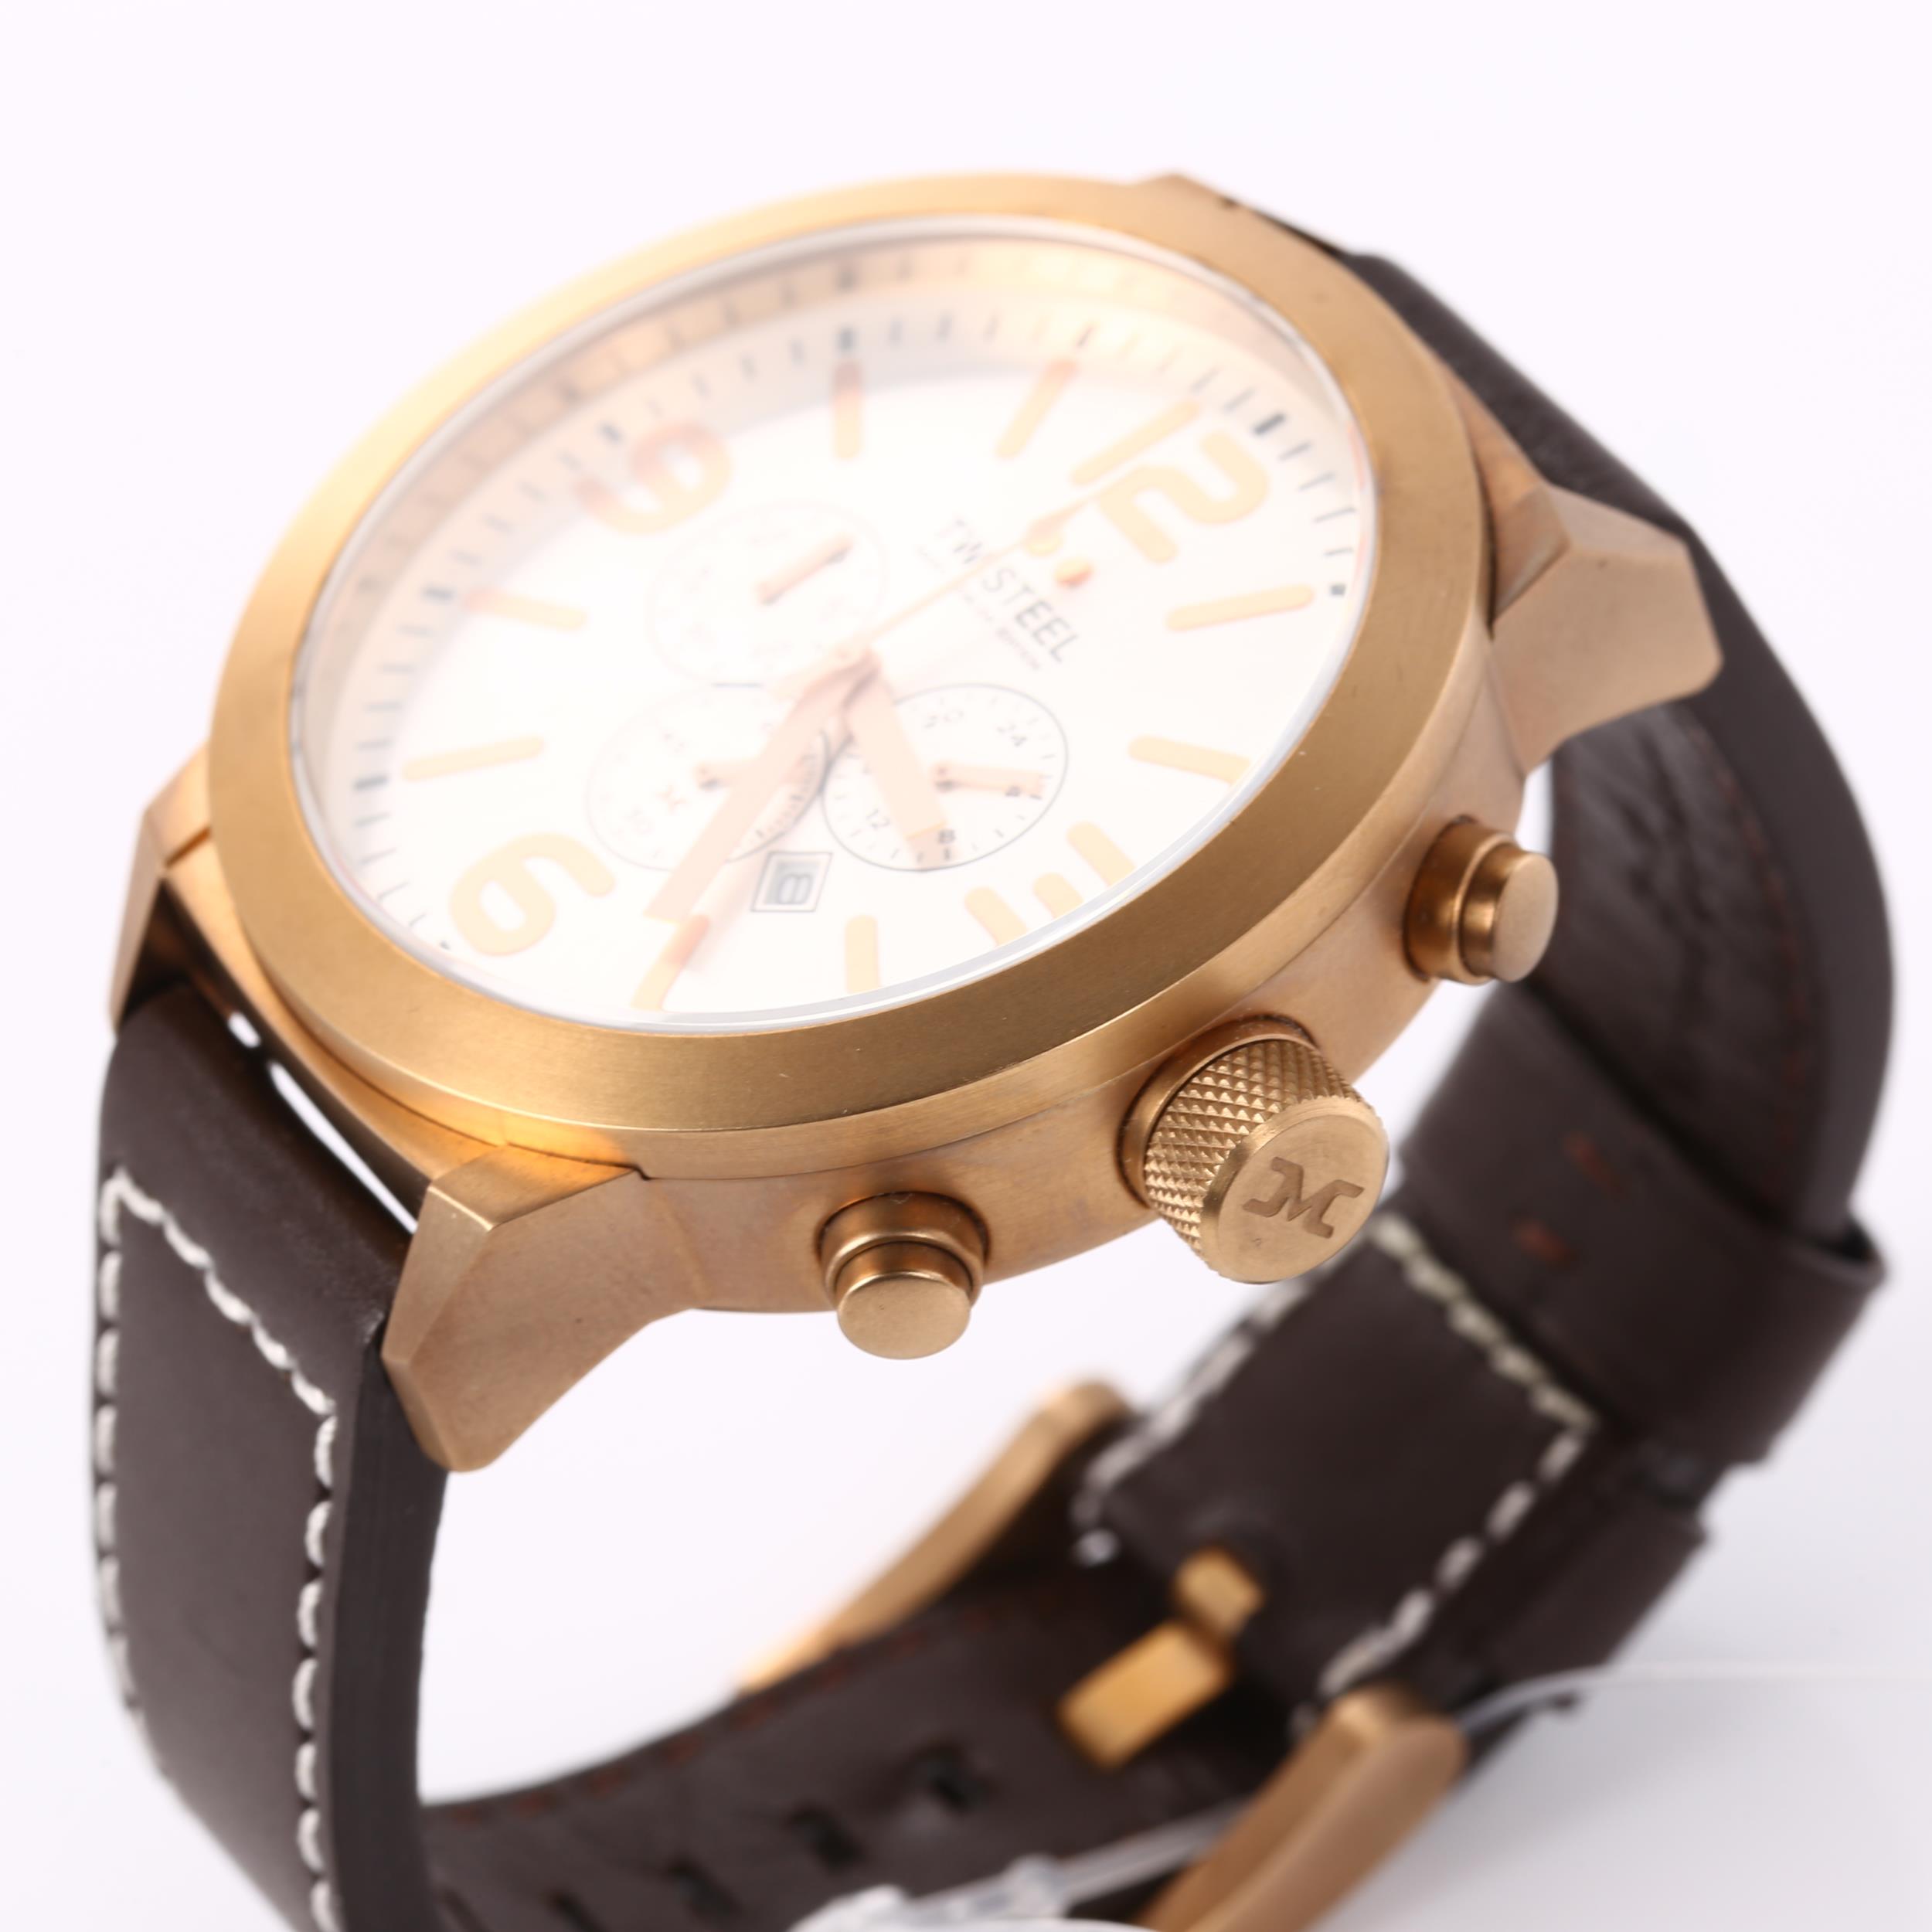 TW STEEL - a rose gold plated stainless steel Marc Coblen Edition quartz chronograph wristwatch, - Image 2 of 5